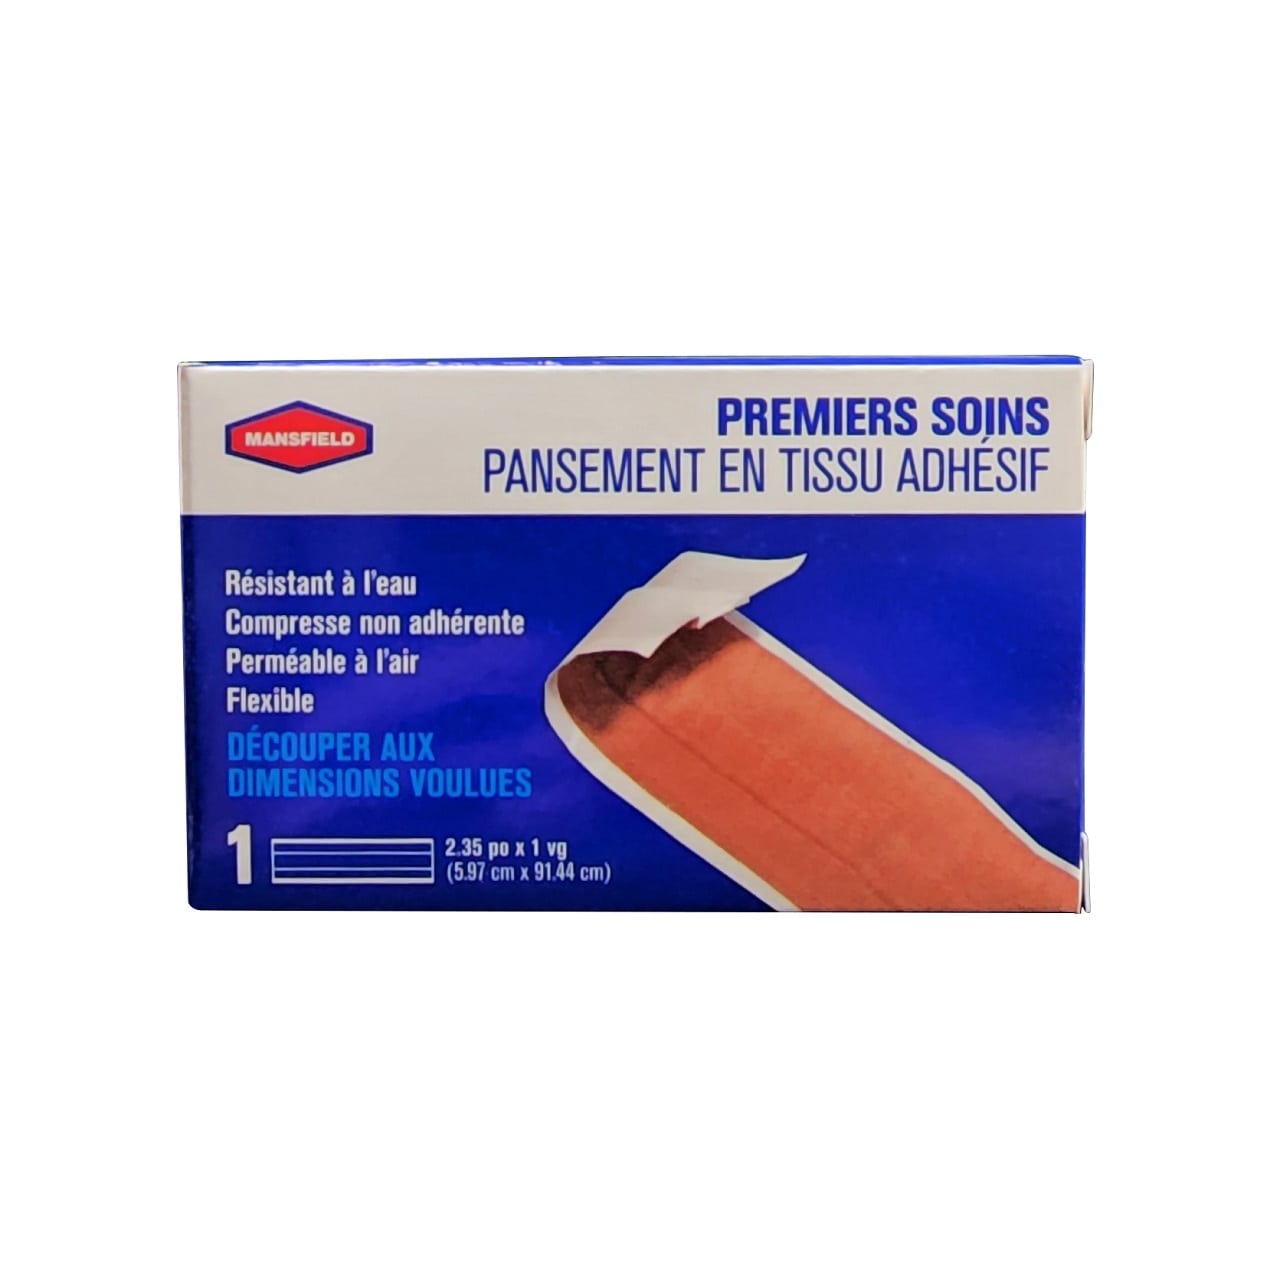 Product label for Mansfield First Aid Adhesive Fabric Dressing Strip (5.97 cm x 91.44 cm) in French